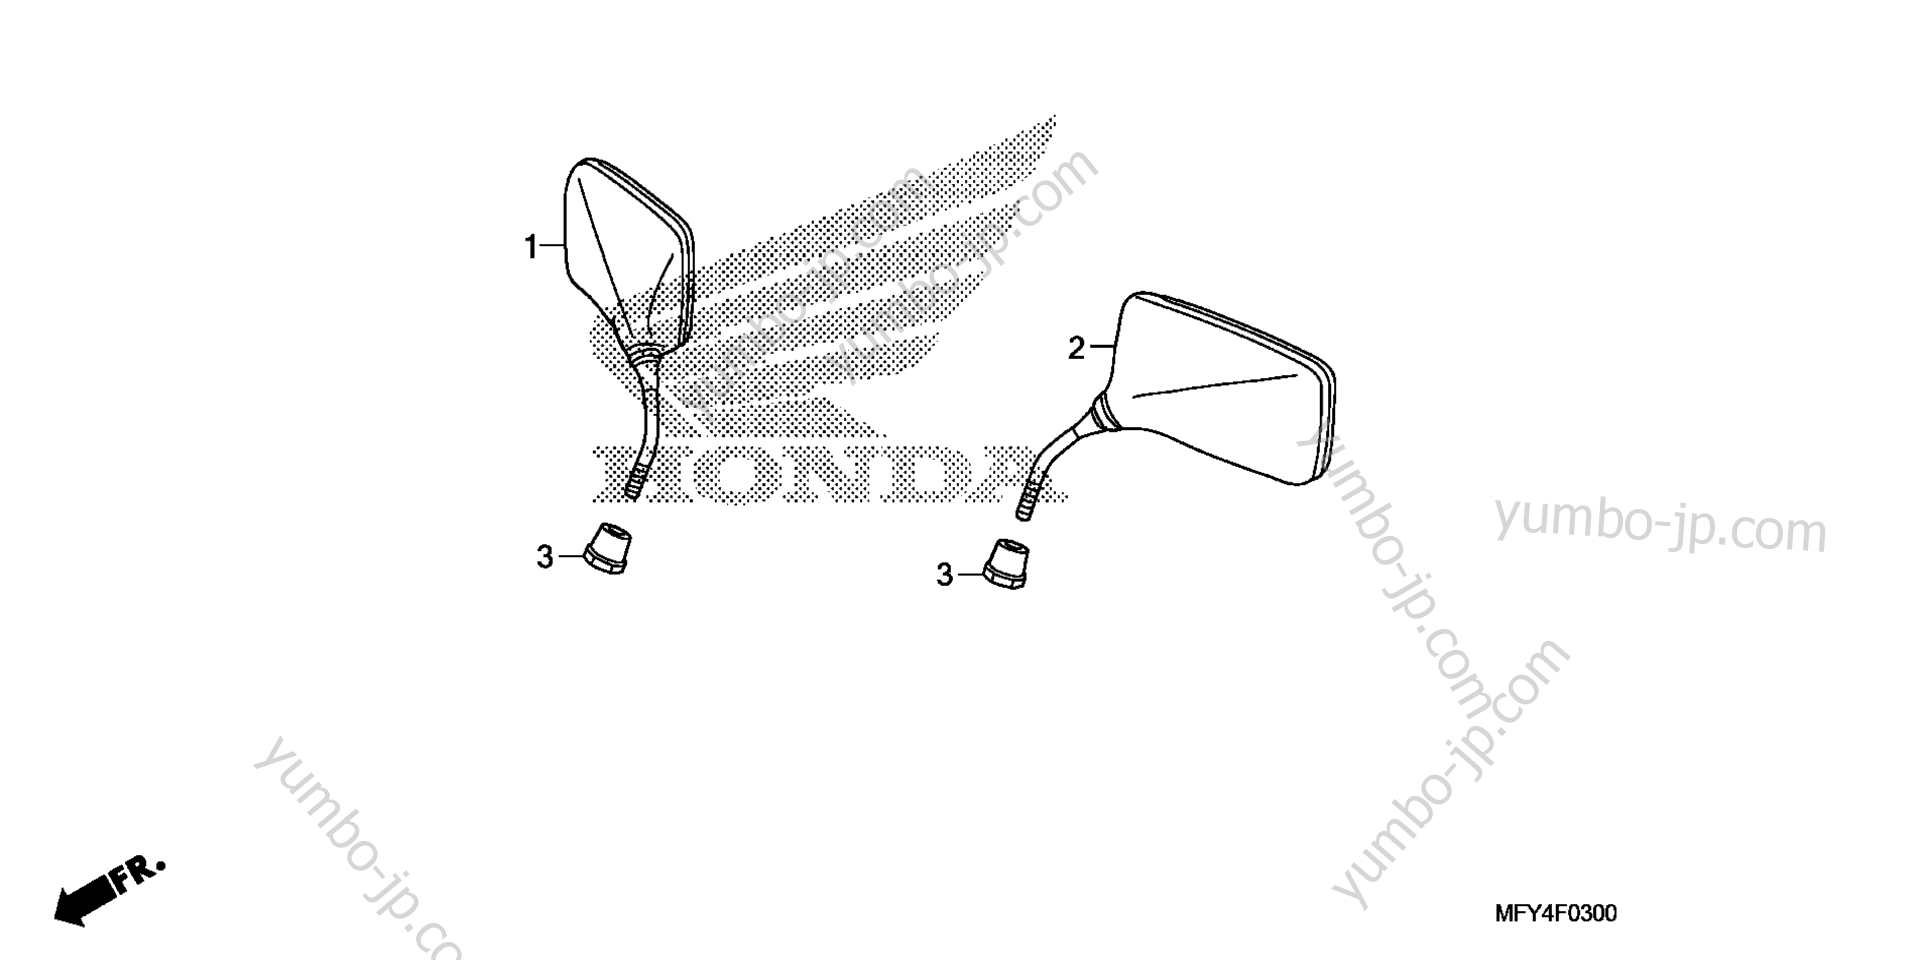 MIRROR for motorcycles HONDA VT1300CT AC 2010 year